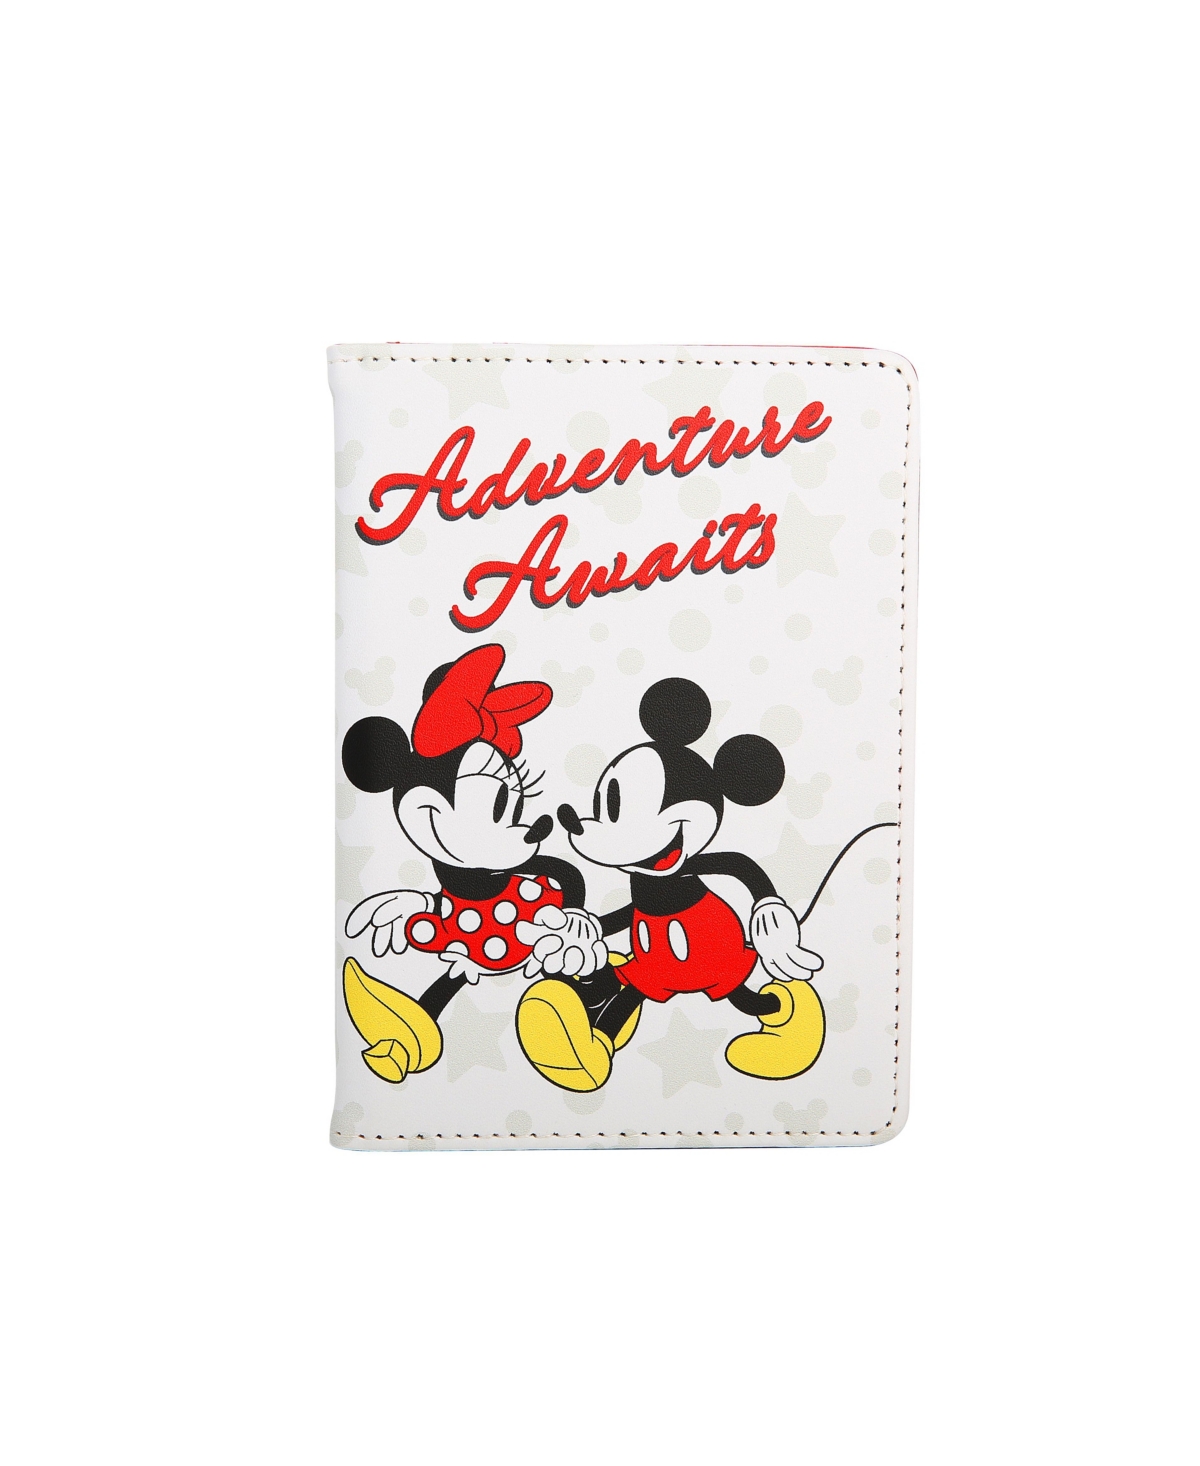 Mickey & Minnie Passport Holder - Cute Travel Wallet for Disney Fans, Officially Licensed - Red, white